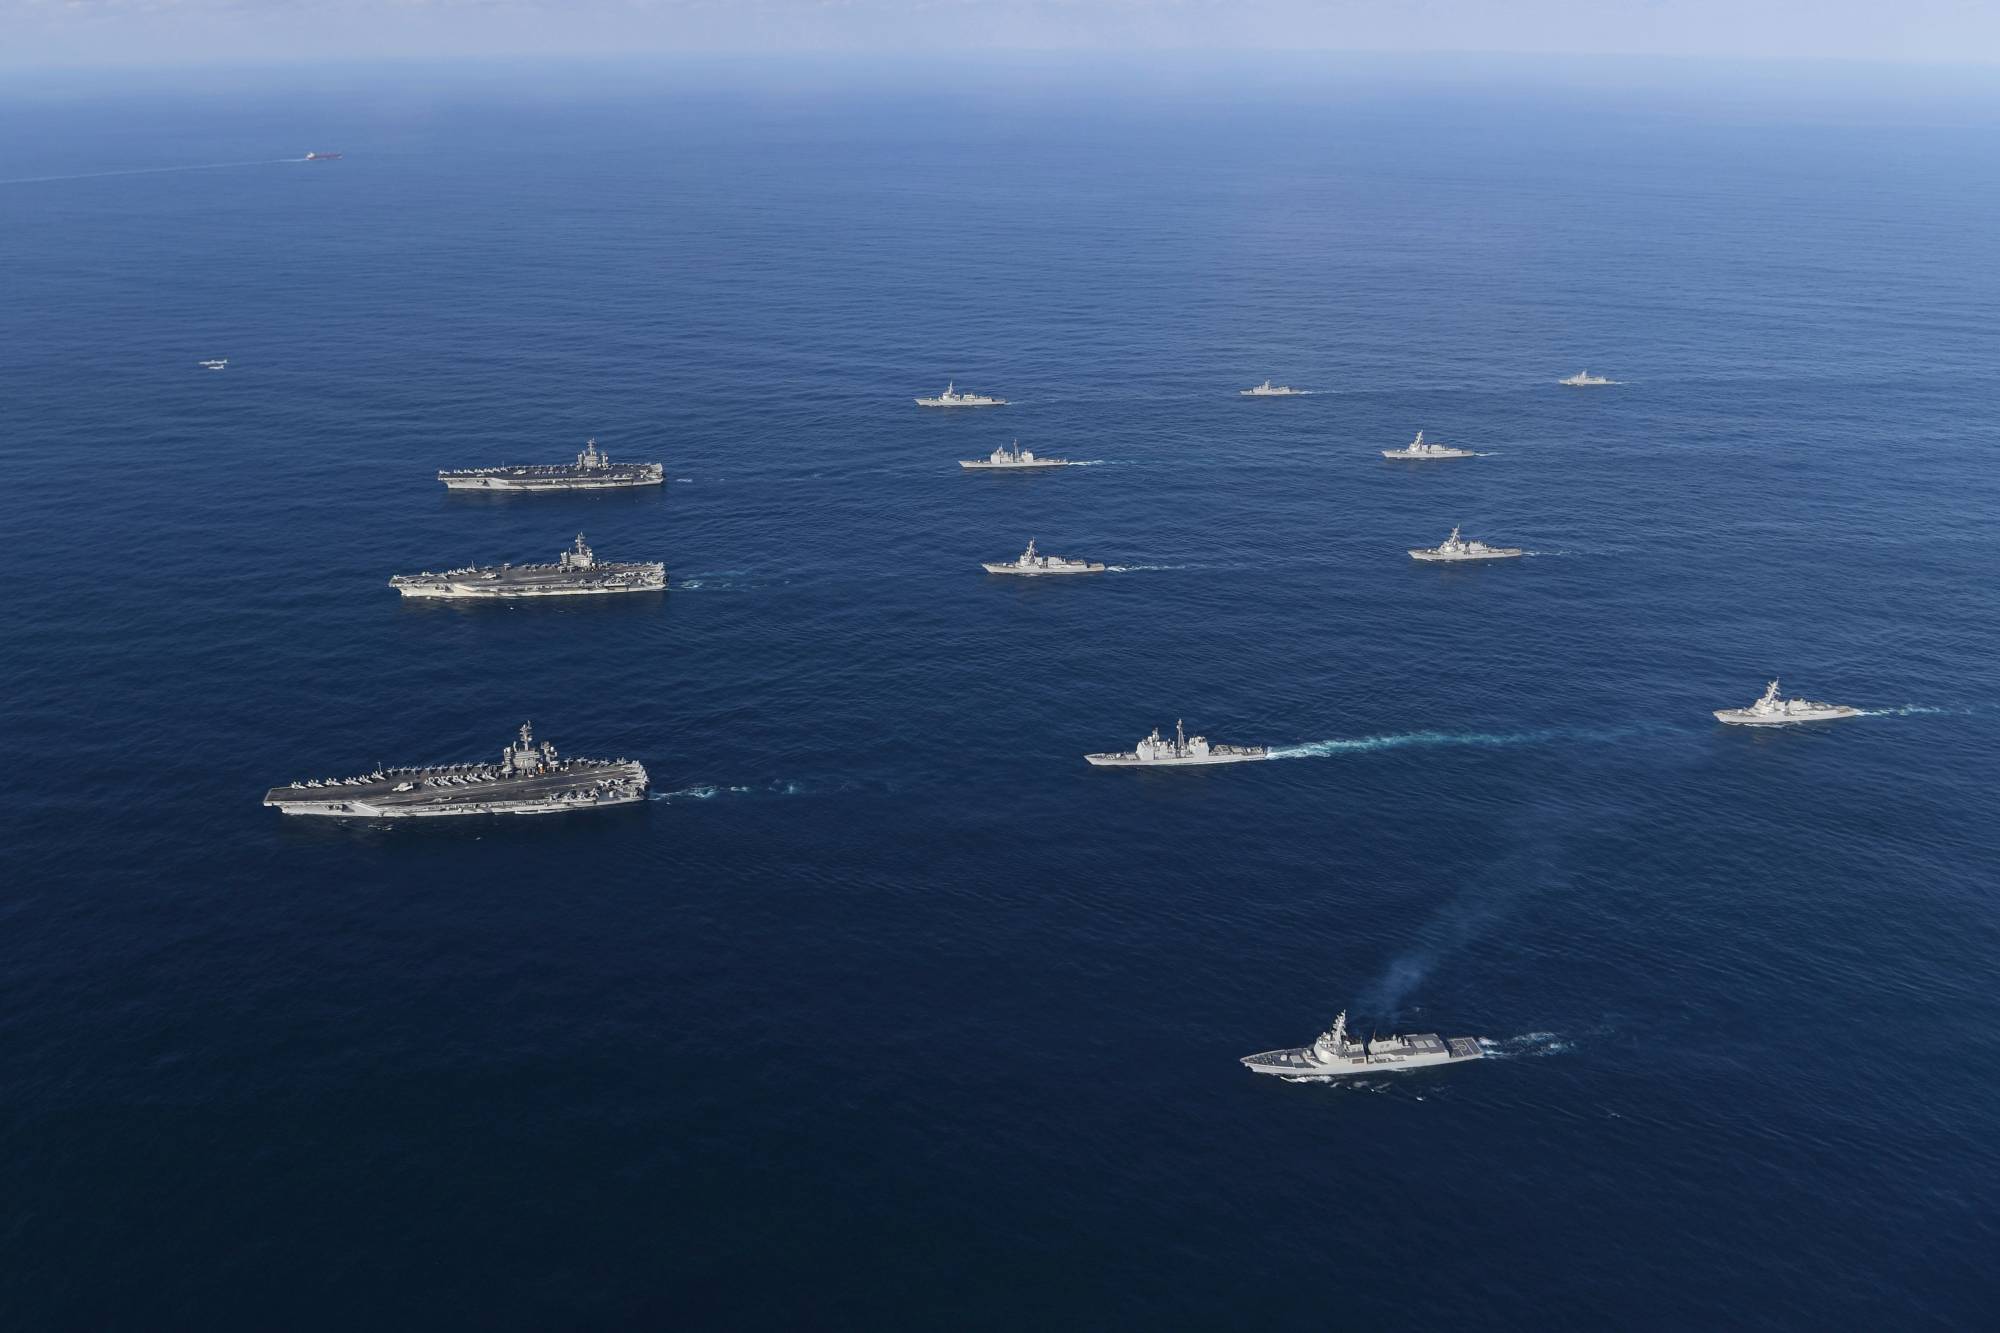 FILE - In this Nov. 12, 2017, file photo provided by South Korea Defense Ministry, three U.S. aircraft carriers USS Nimitz, left top, USS Ronald Reagan, left center, and USS Theodore Roosevelt, left bottom, participate with other U.S. and South Korean navy ships during a joint naval exercises between the United States and South Korea in waters off South Korea's eastern coast. U.S. President Donald Trump promised to end “war games” with South Korea, calling them provocative, after meeting North Korean leader Kim Jong Un on June 12, 2018. His announcement appeared to catch both South Korea and the Pentagon by surprise. (South Korea Defense Ministry via AP, File)